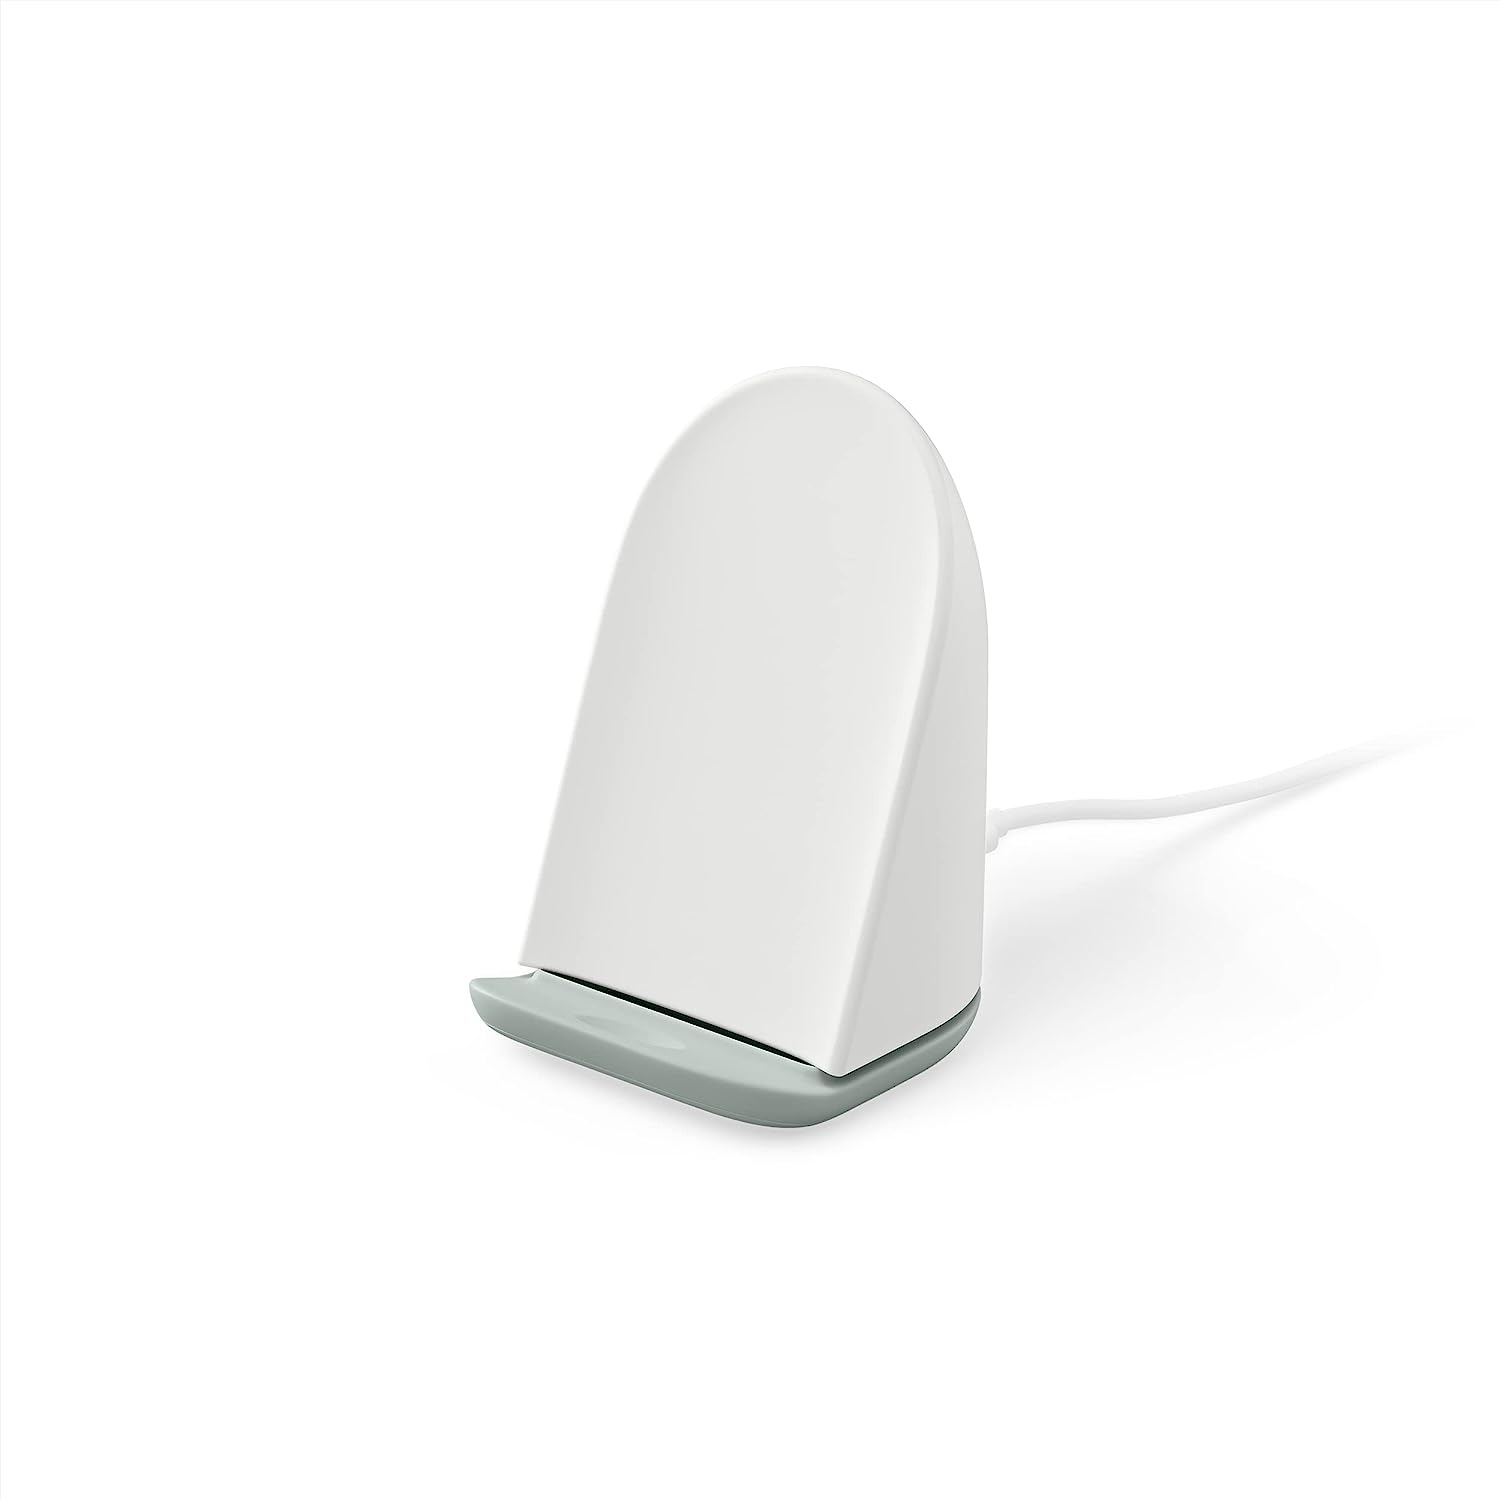 Google Pixel Stand 2nd Gen Charger Stand for Qi-Certified Devices - Clearly White (Pre-Owned)